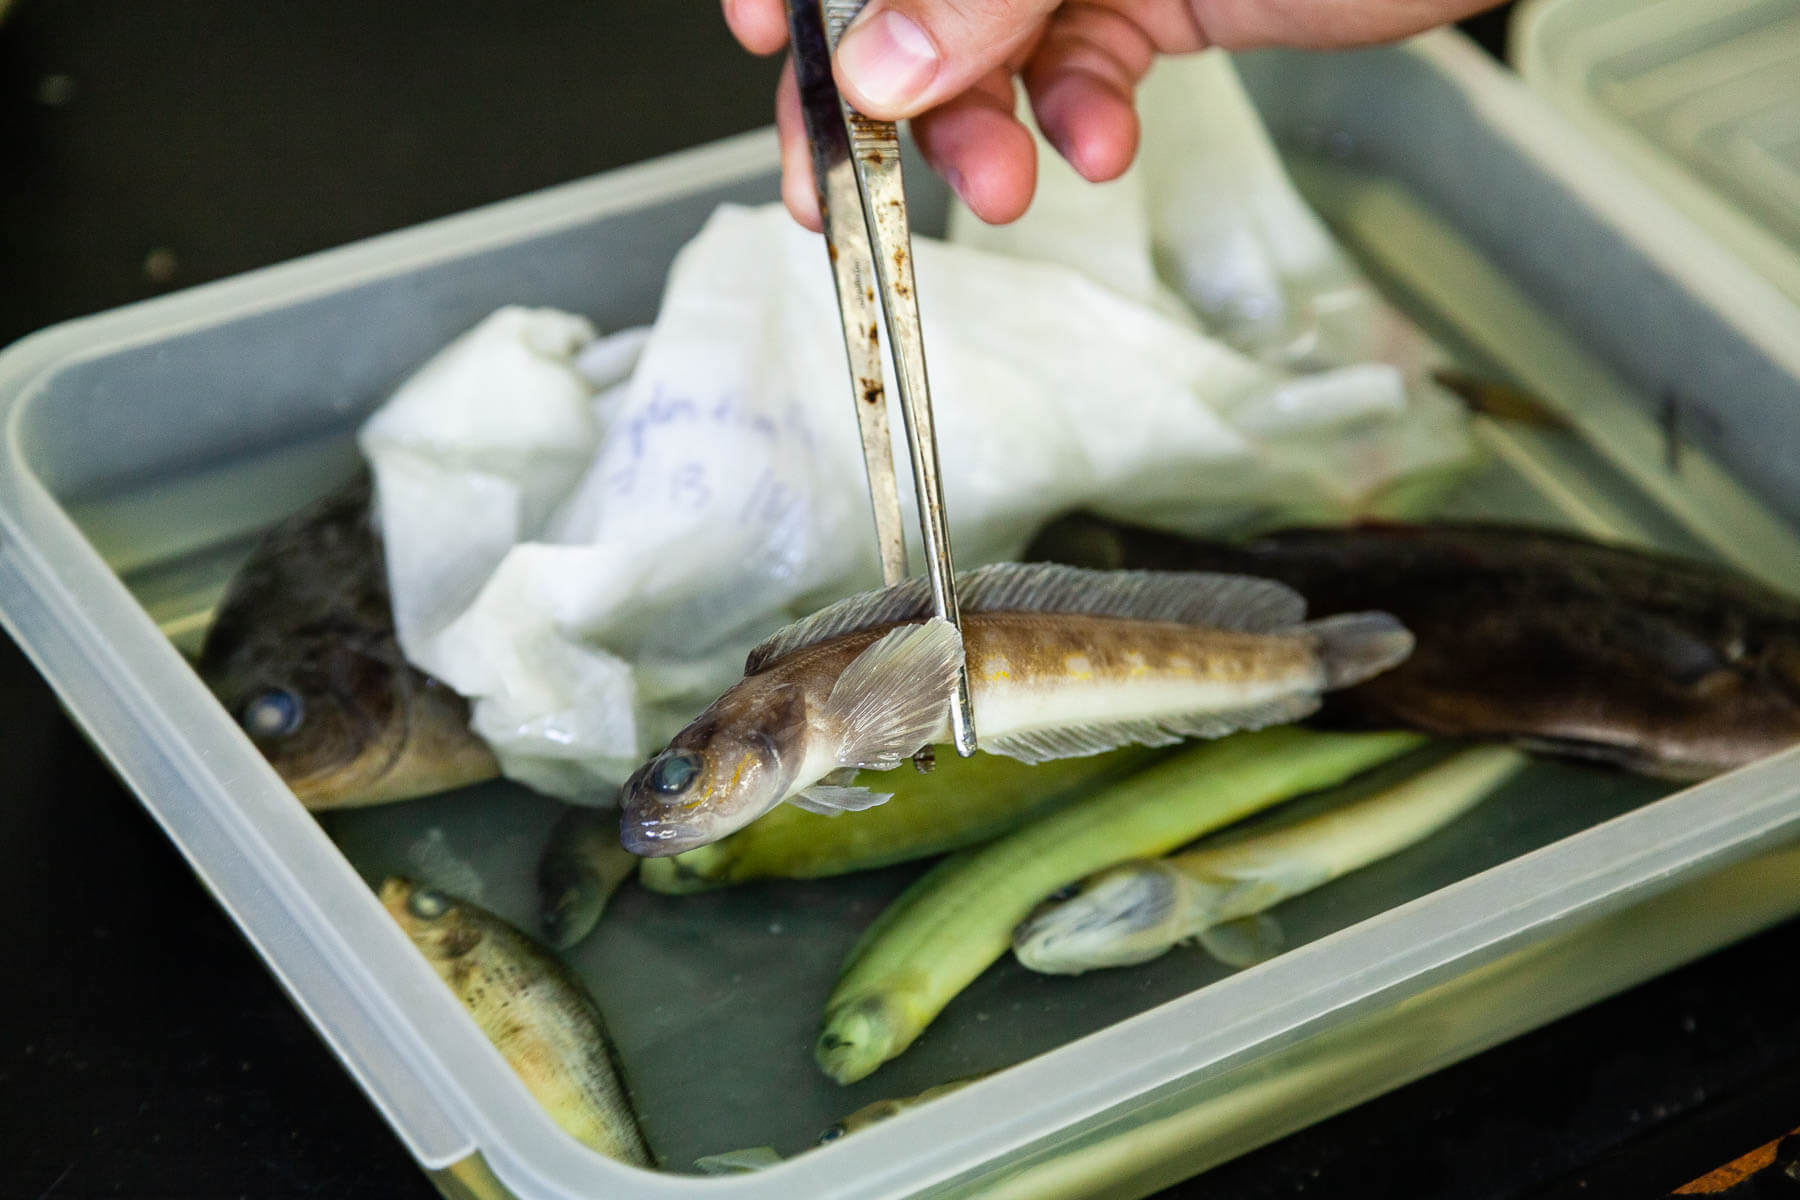 A tray of fluid holds several preserved fish